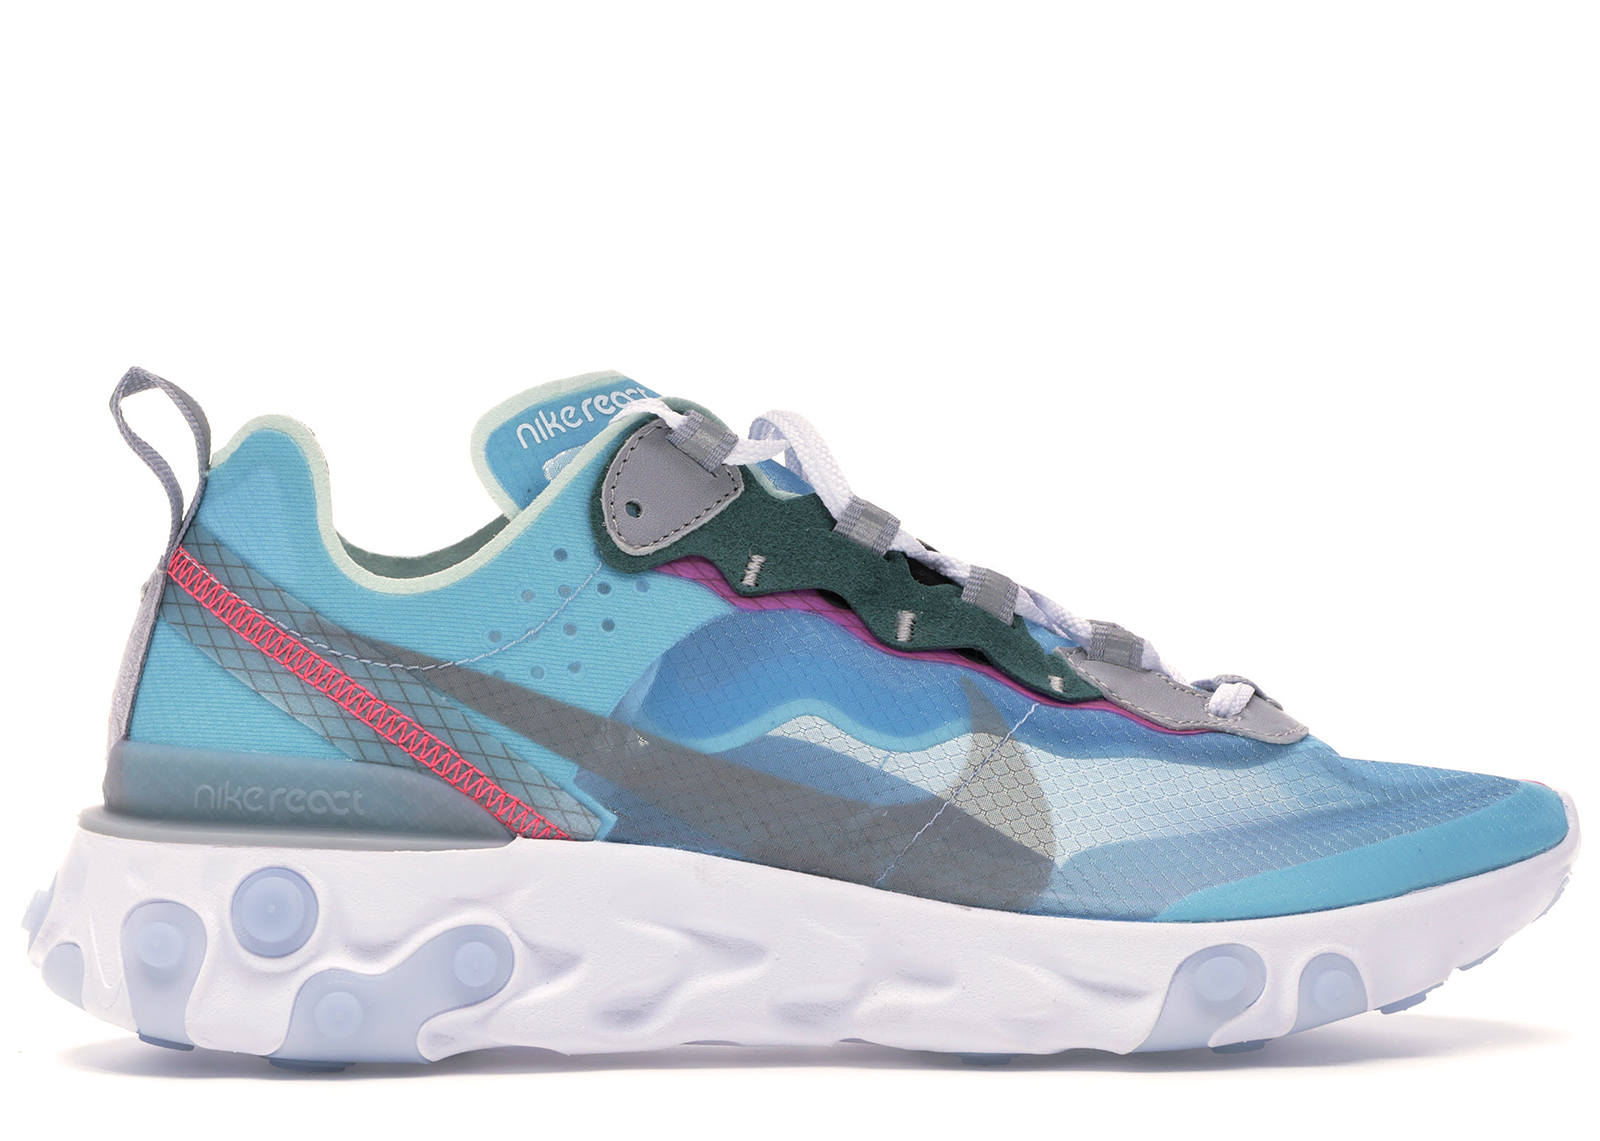 nike react element 87 in stock